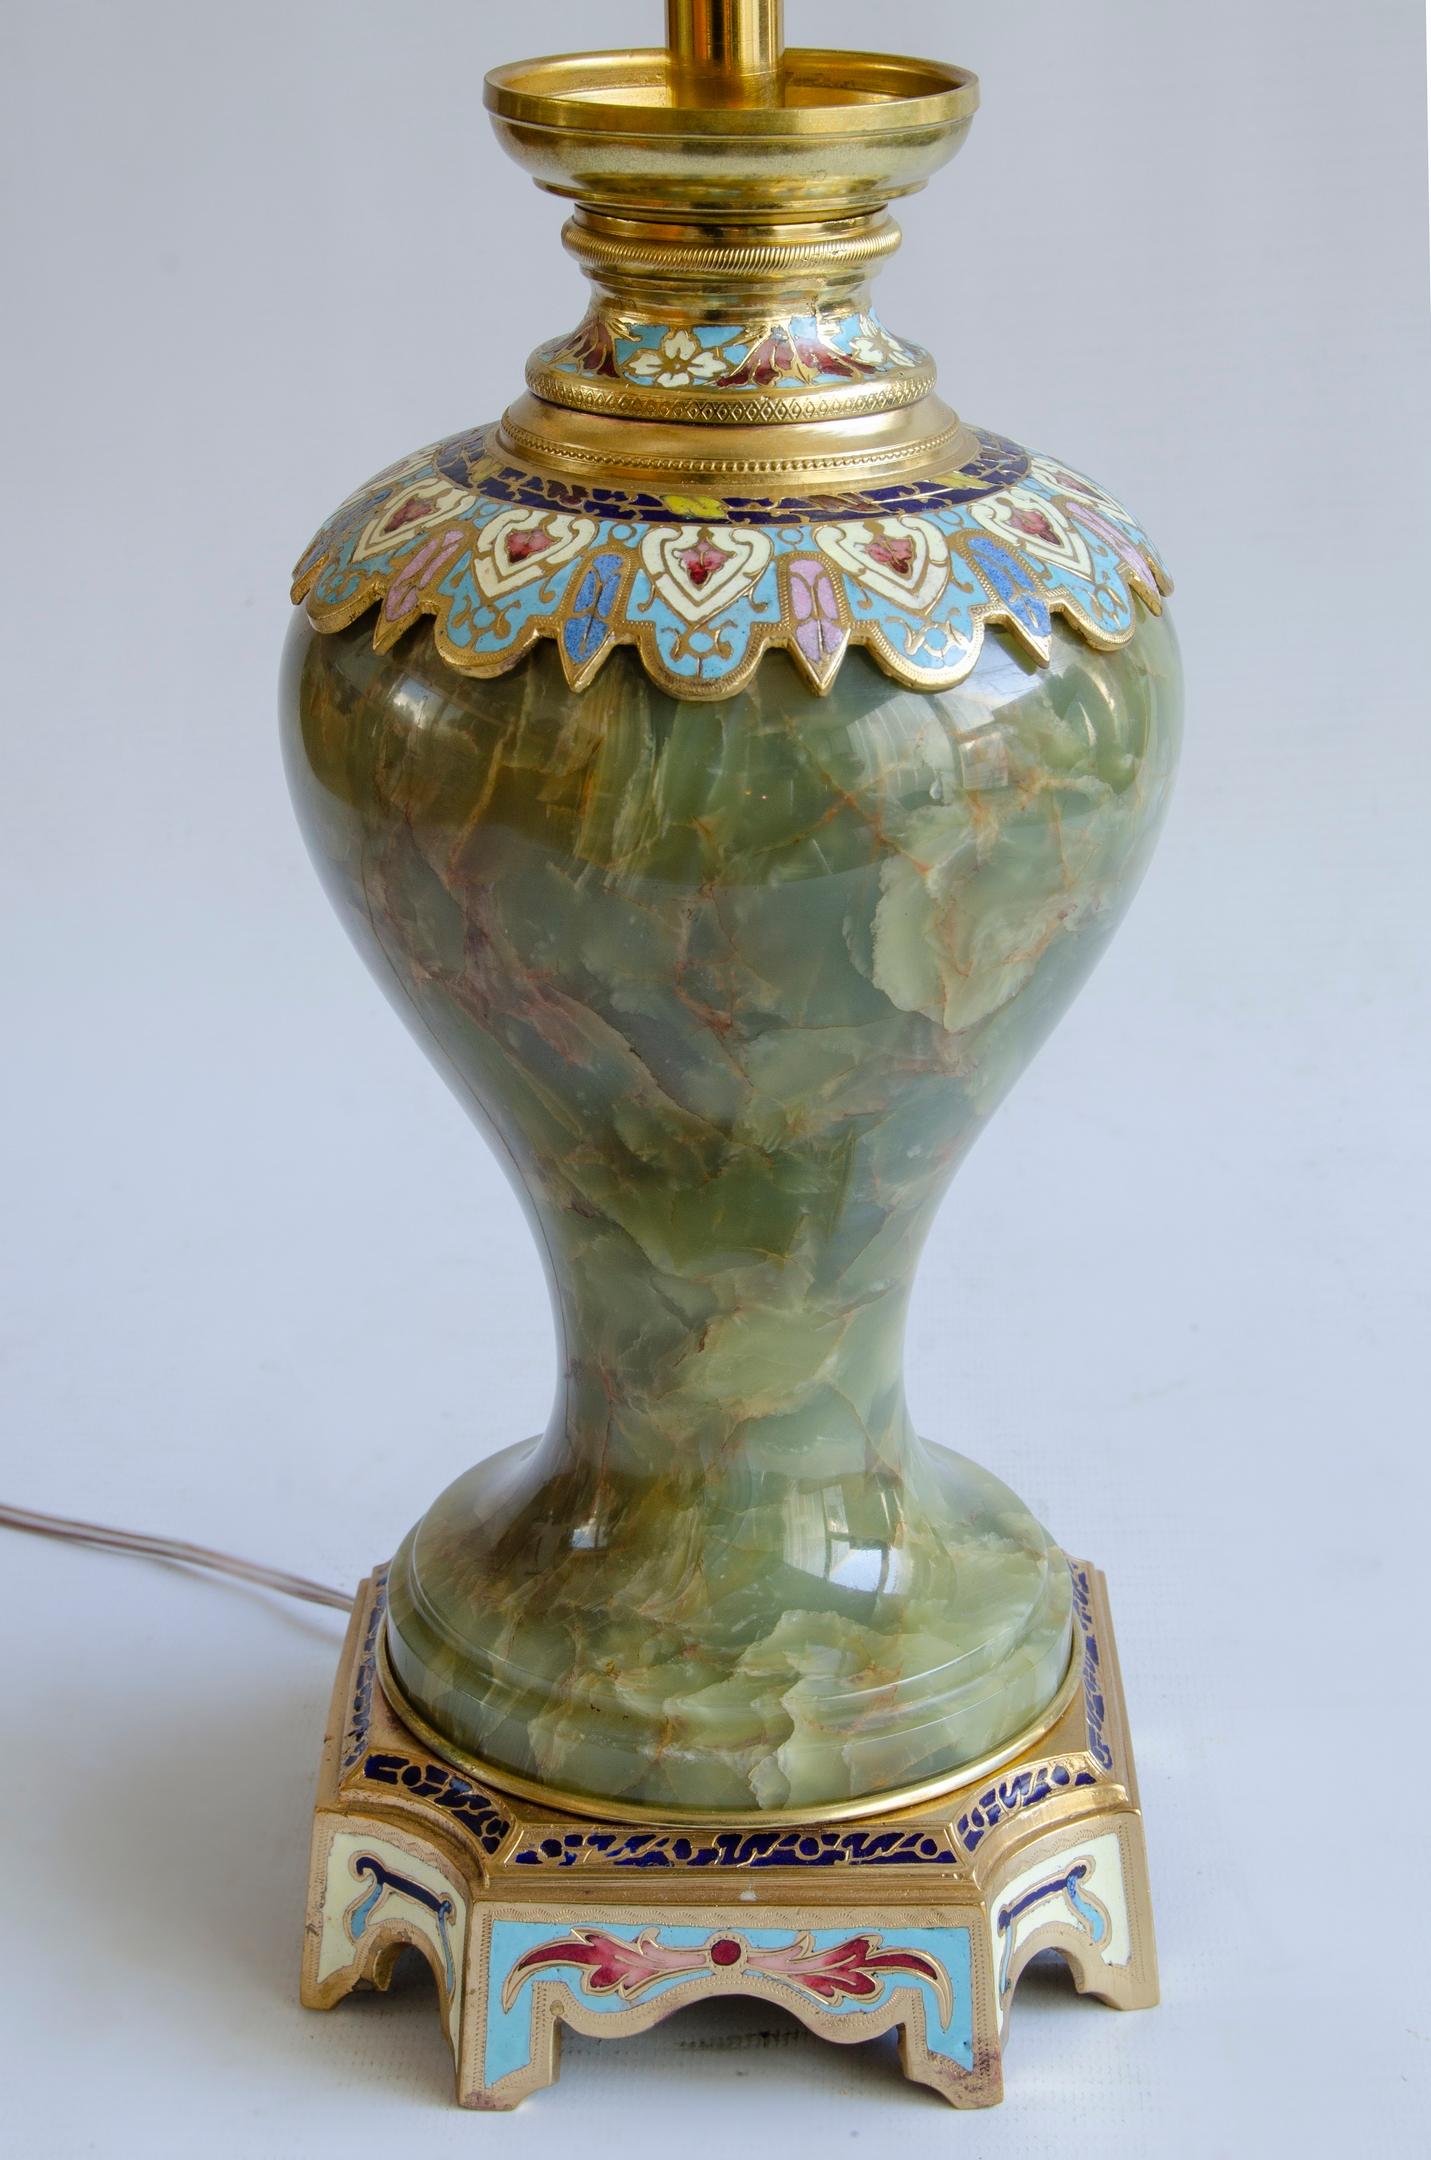 Napoleon III table lamp
materials gilt bronze, onyx and cloisone enamel
Origin France circa 1860
electrified 220 w perfect condition.
The Napoleon III style had its heyday during the 1850s and 1880s. Emperor Napoleon wanted to emulate the lavishness